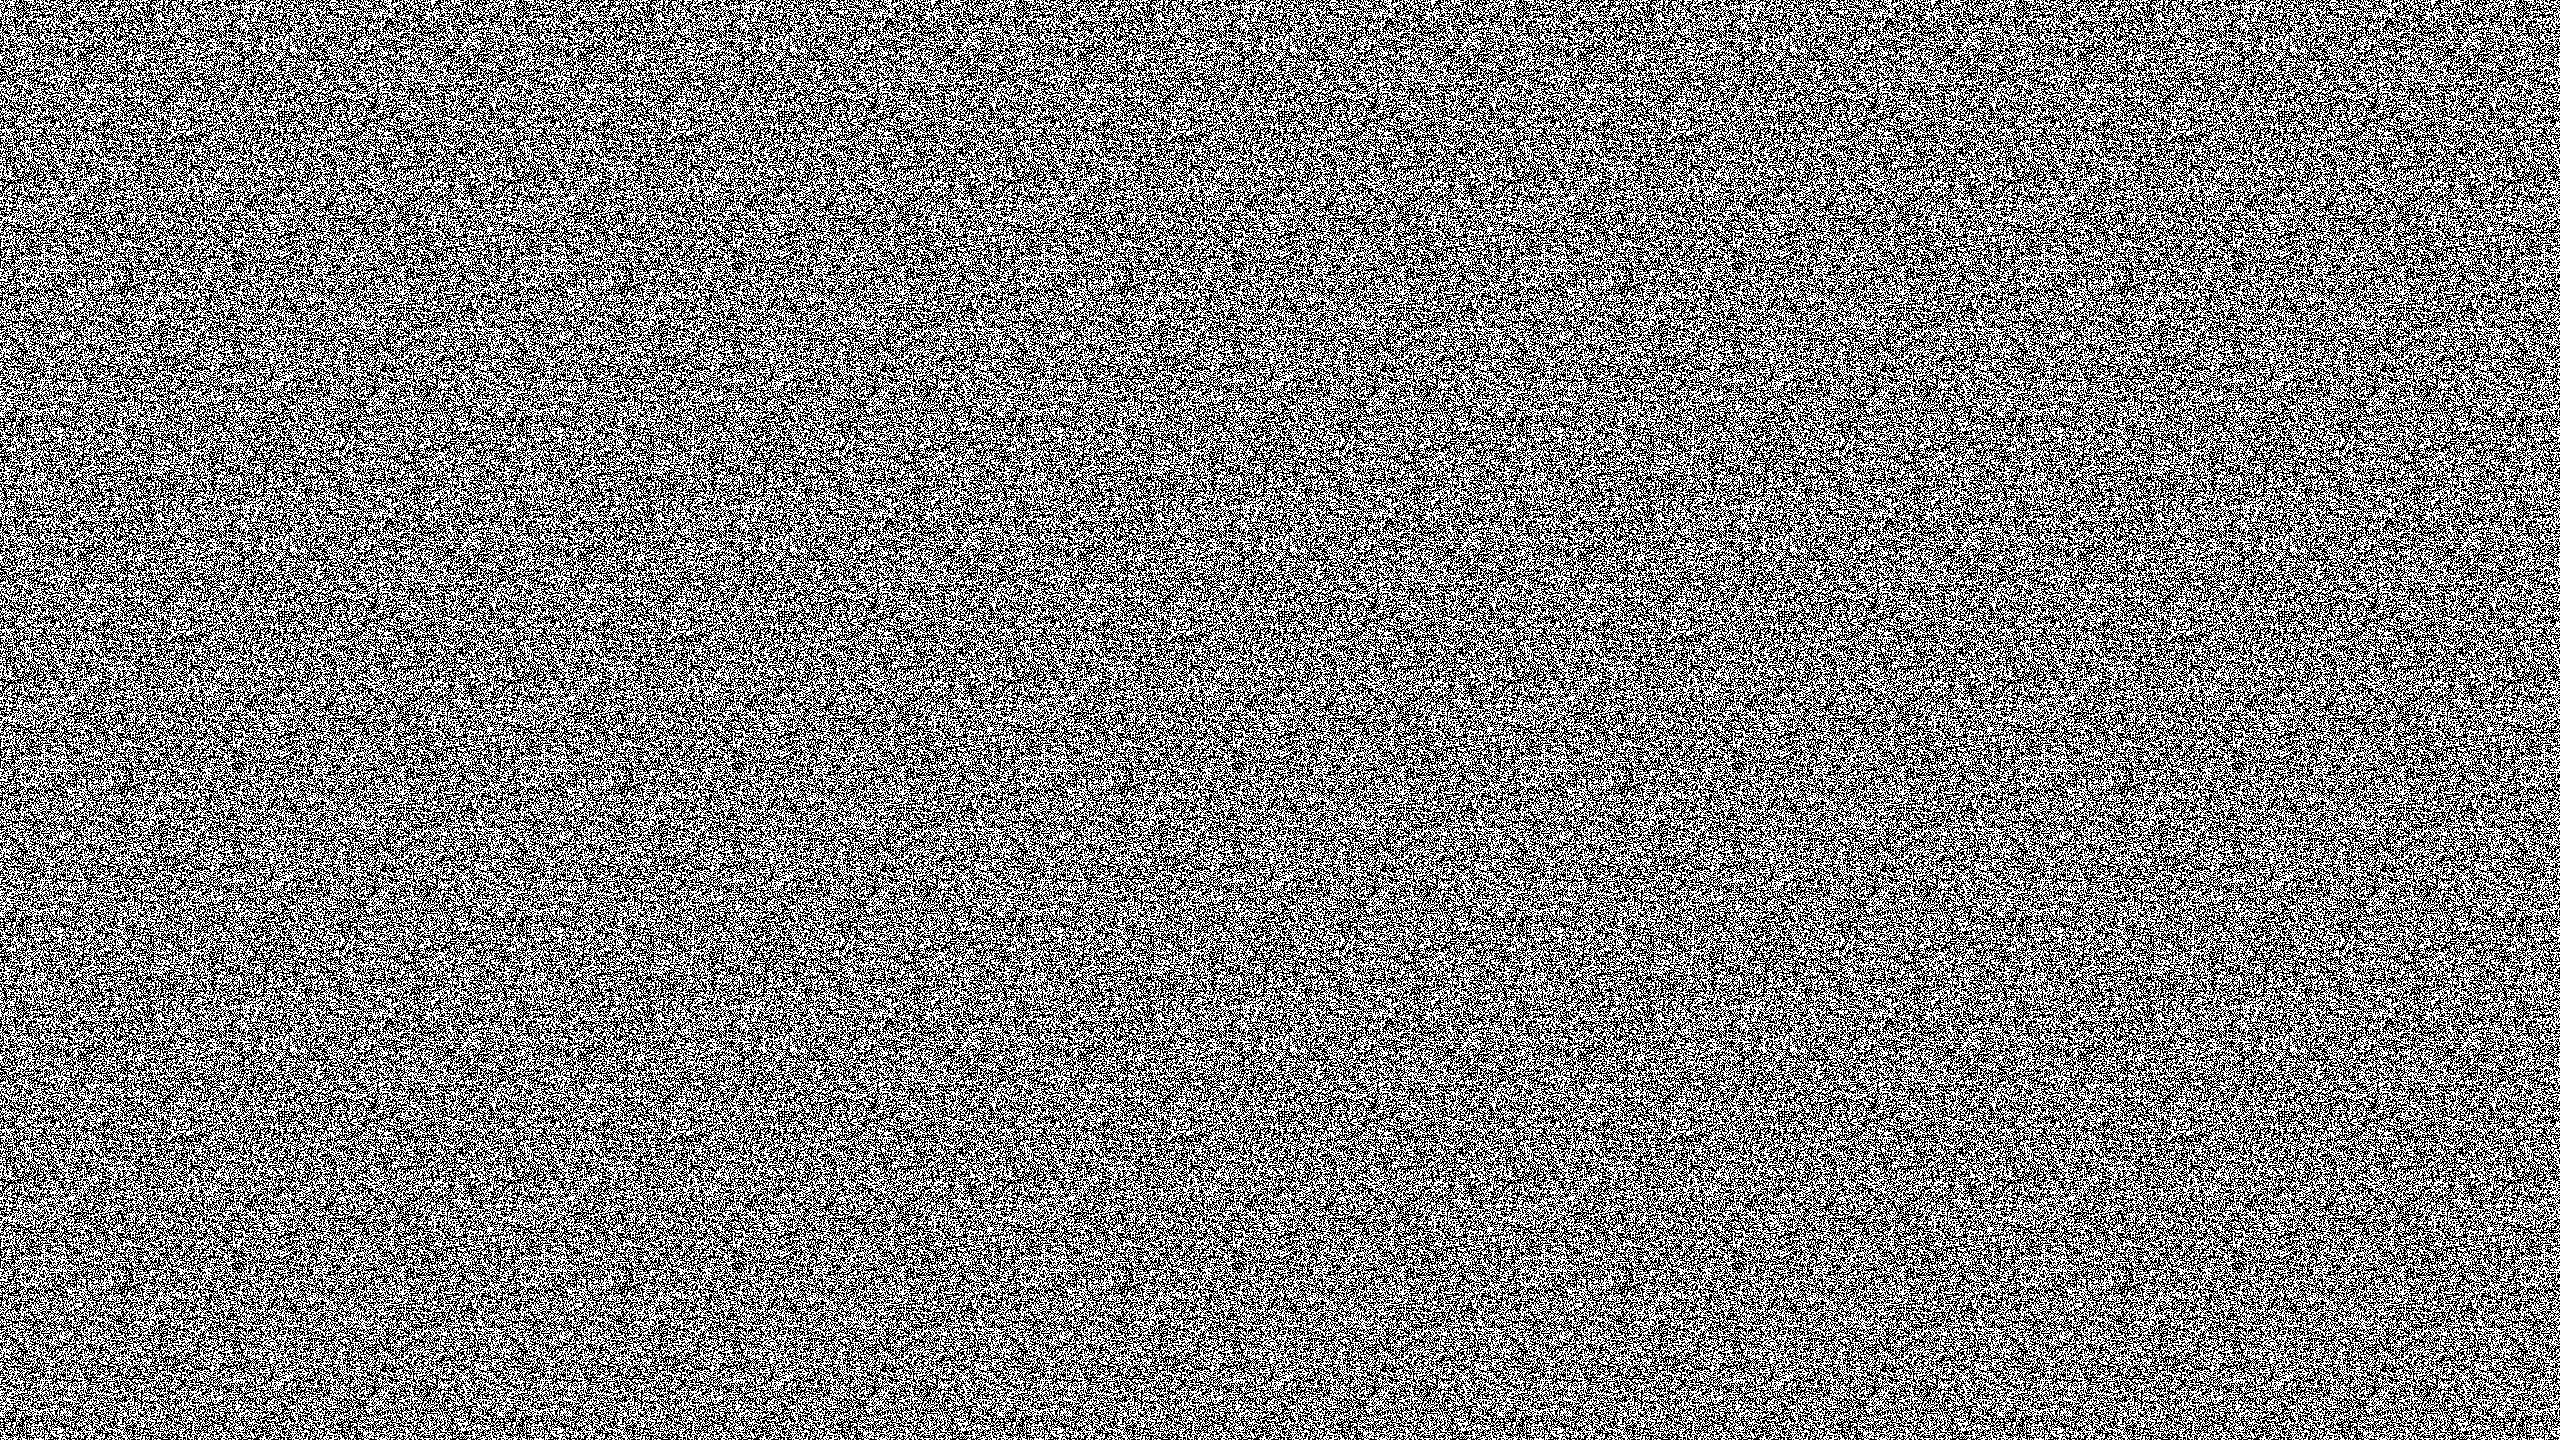 Free download this Static Flash Desktop Wallpaper is easy Just save the  wallpaper 2560x1440 for your Desktop Mobile  Tablet  Explore 49 Static  Wallpaper  Static Wallpaper Android Static Cling Wallpaper